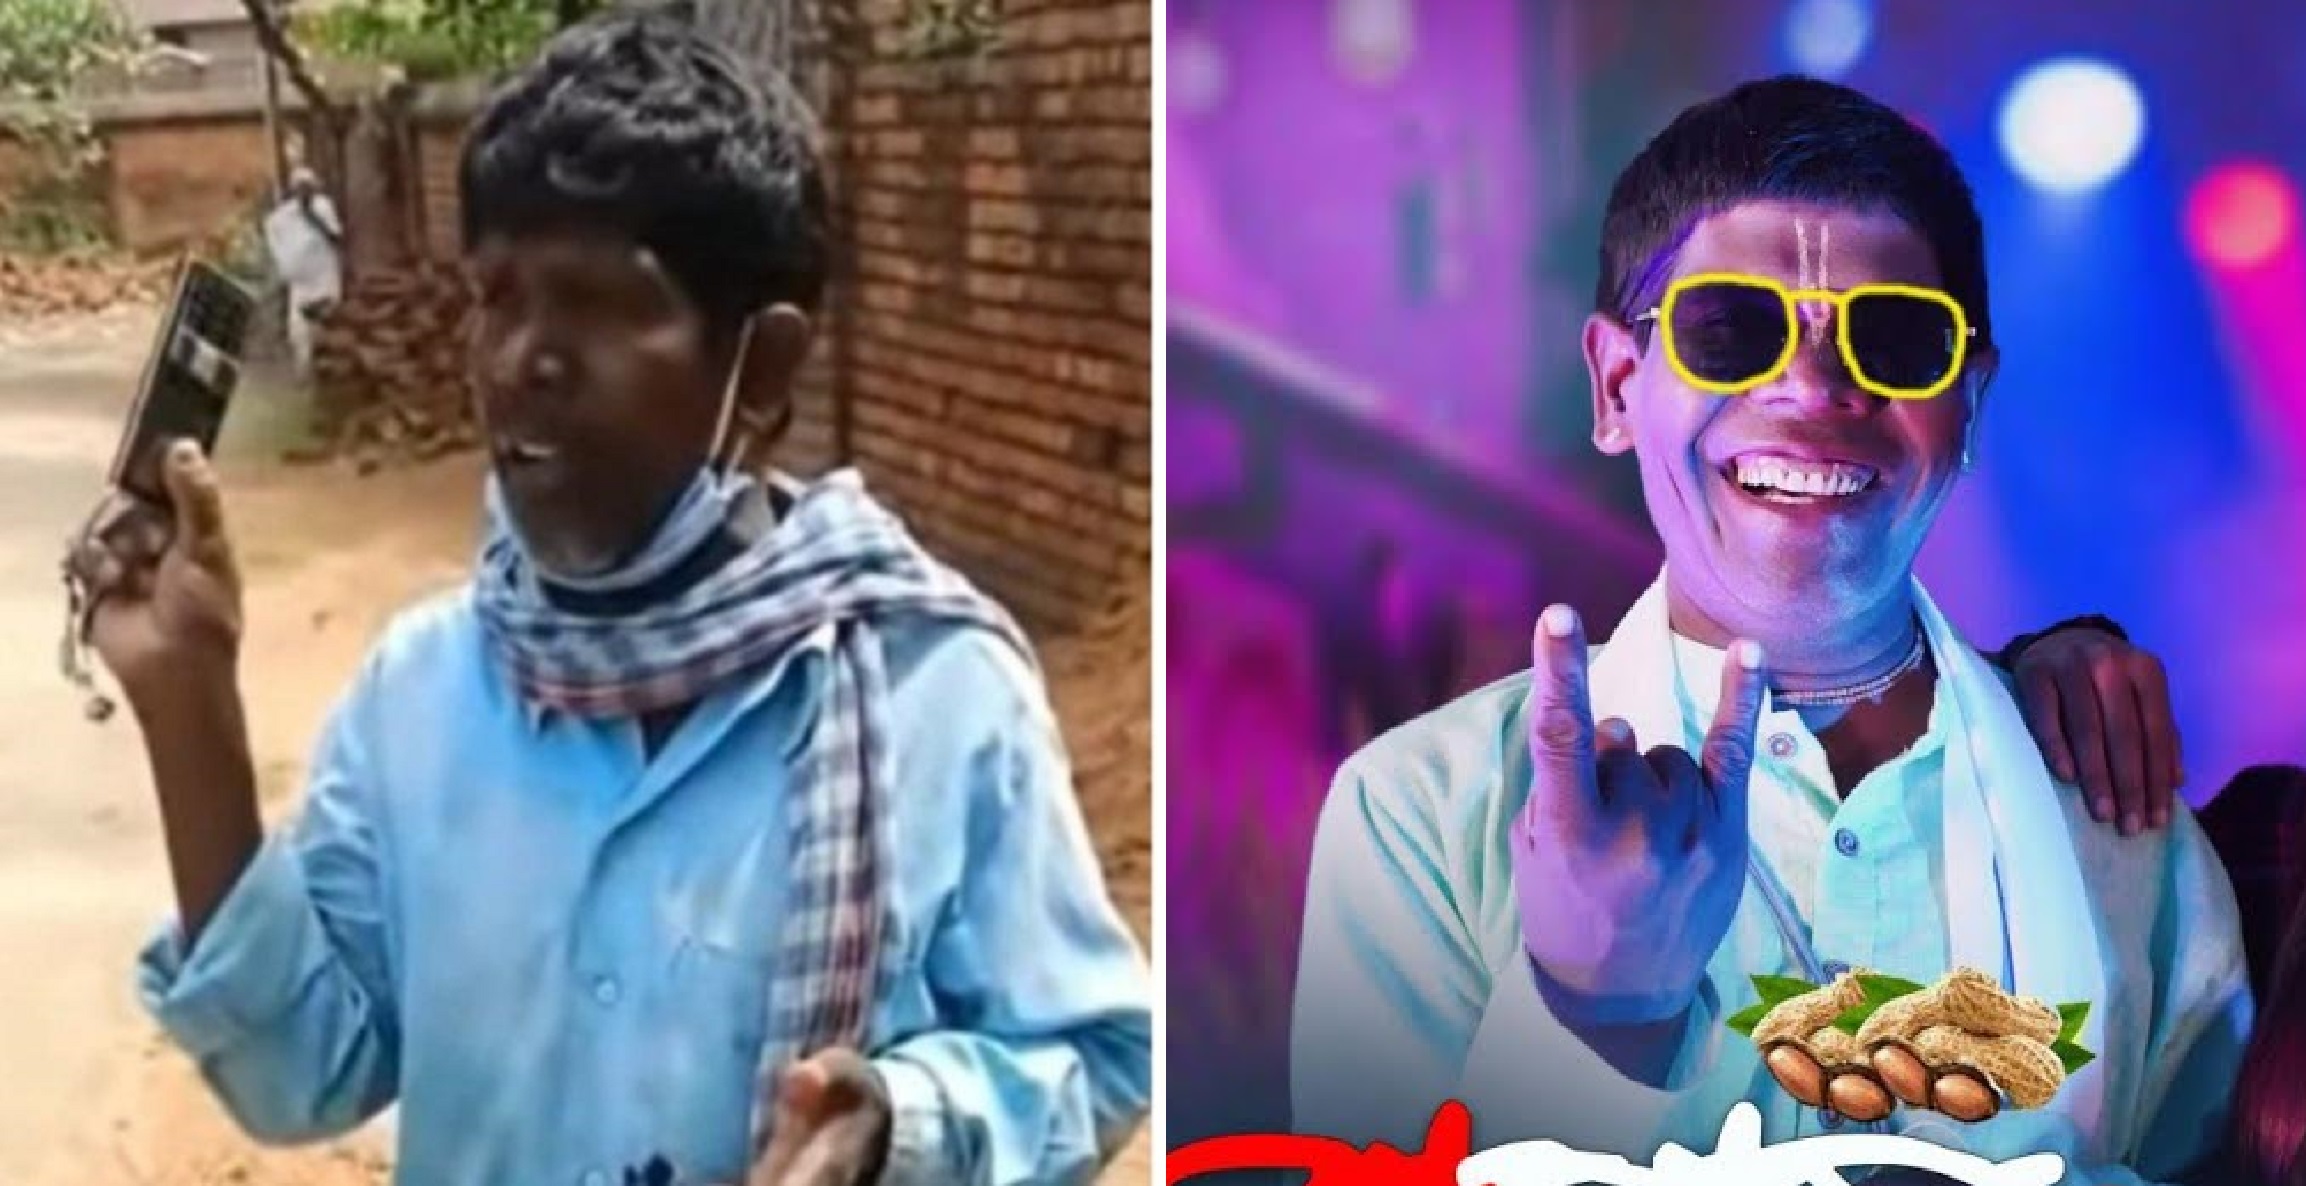 Kacha Badam: The Viral Video Of Street Vendor’s Singing That Has Become A Famous Remix For Short-Video Creators